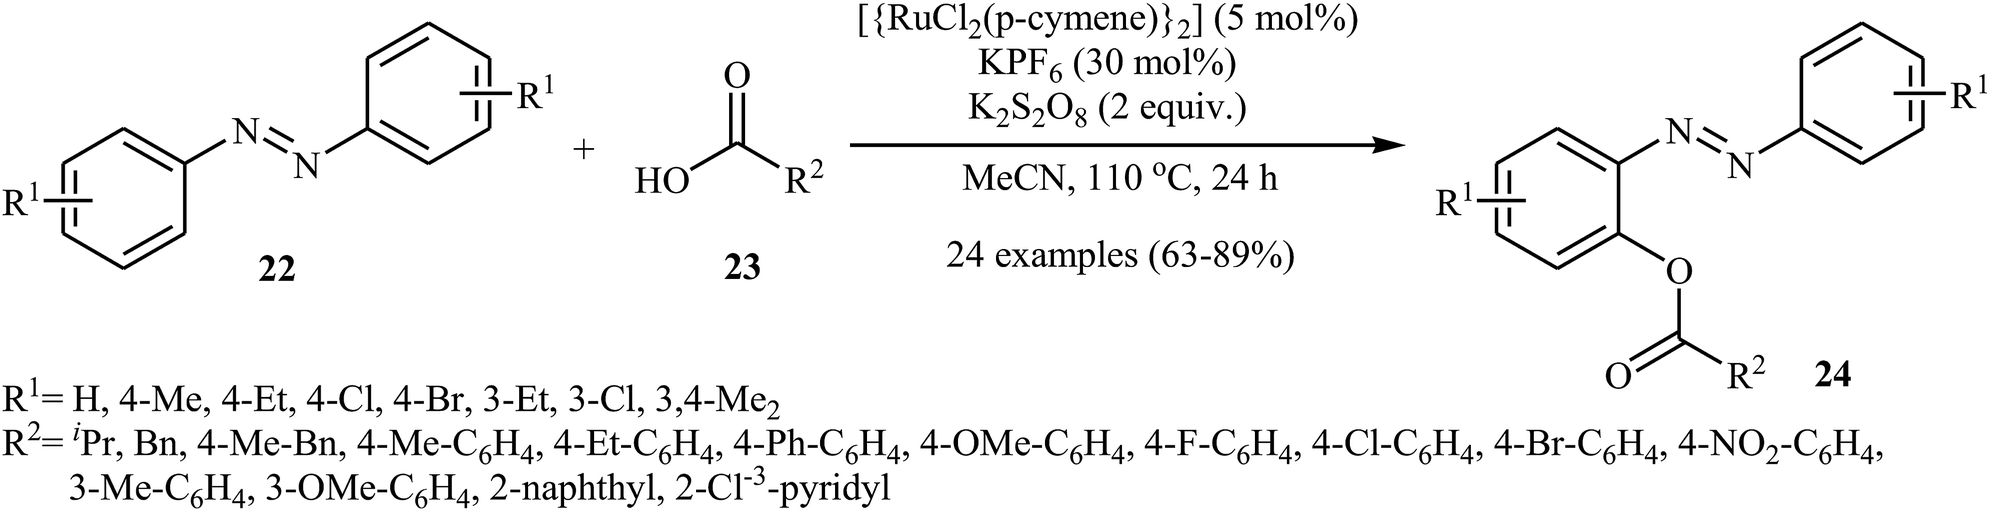 Cross Dehydrogenative Coupling Reactions Between Arenes C H And Carboxylic Acids O H A Straightforward And Environmentally Benign Access To O Ar Rsc Advances Rsc Publishing Doi 10 1039 C9rac